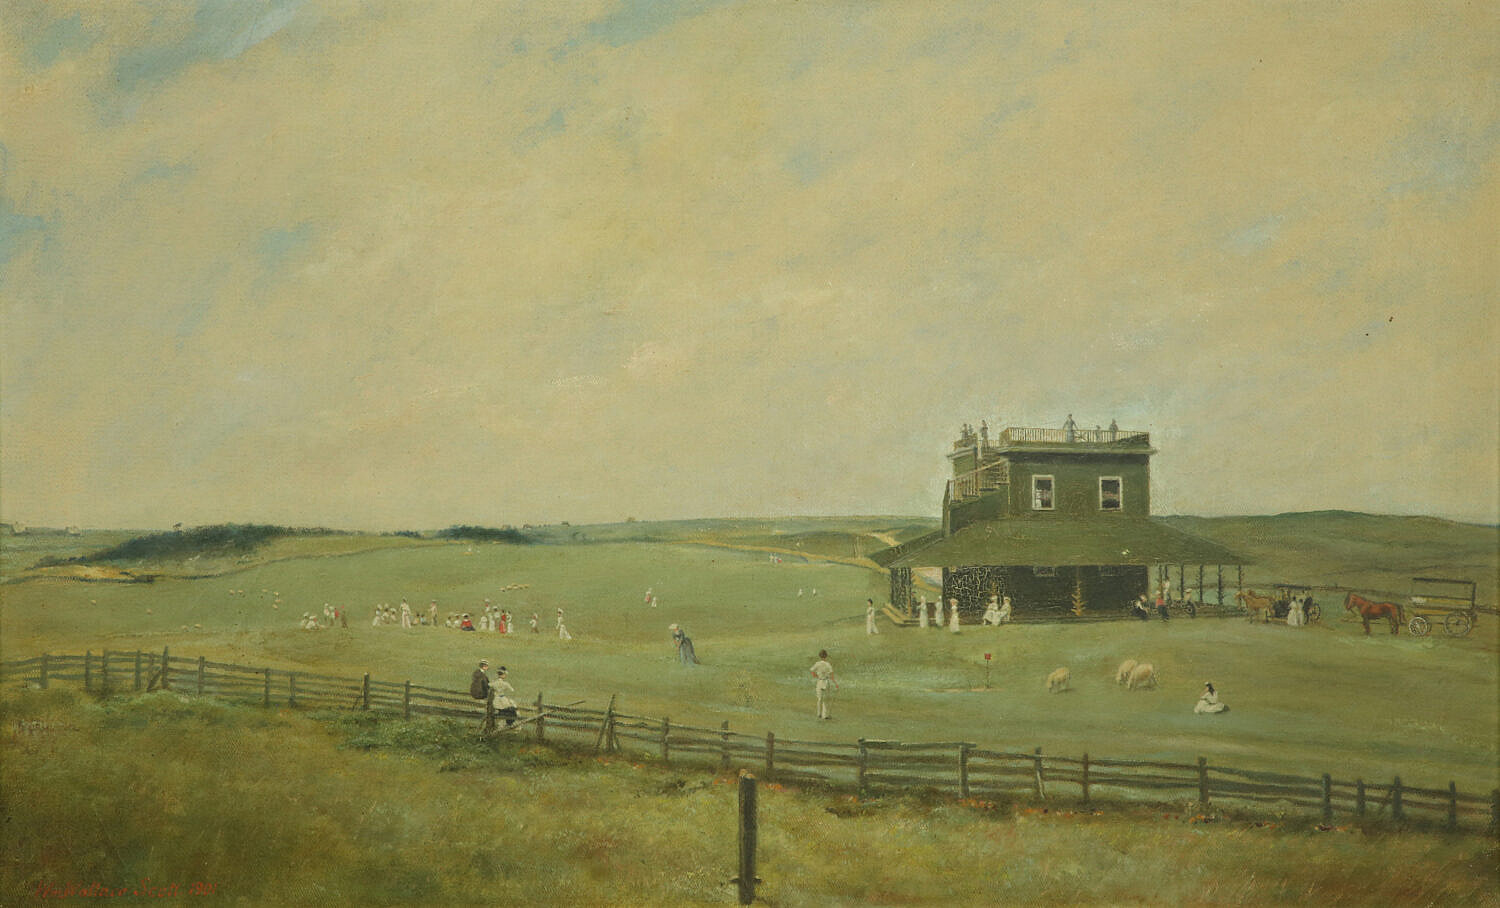  William Wallace Scott, ‘Old Nantucket Golf Course,’ $23,370